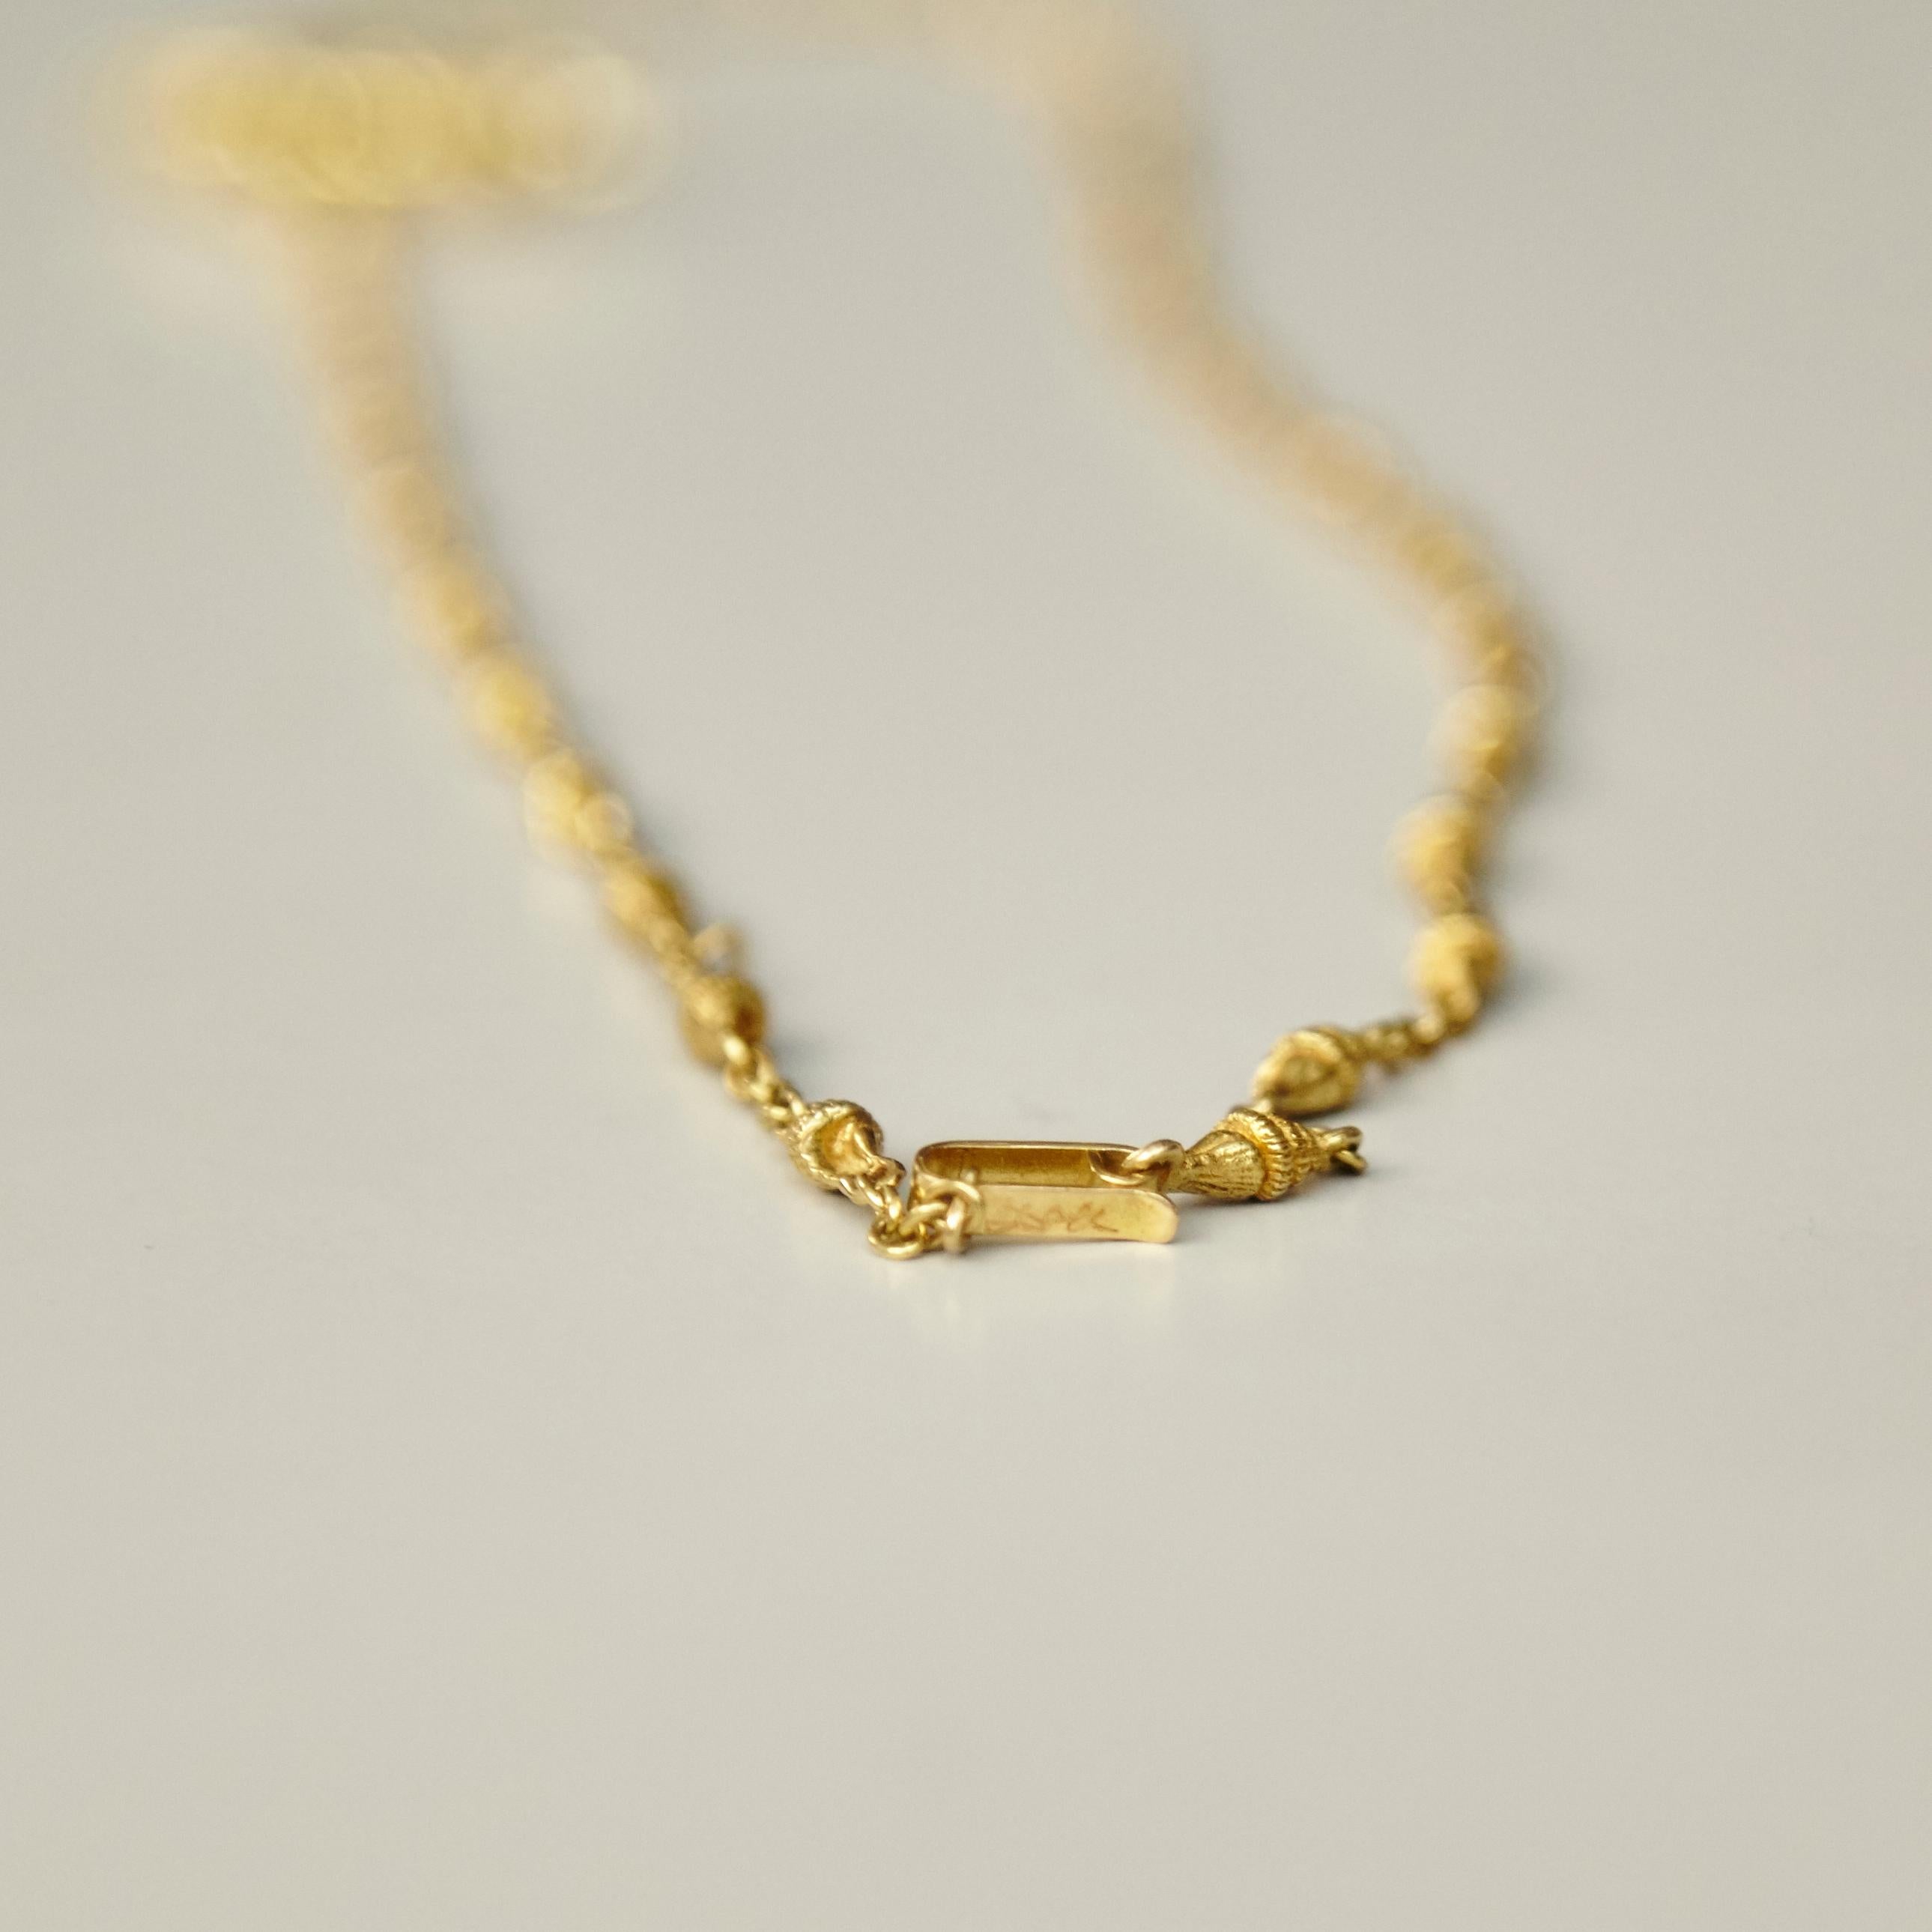 Limited Edition Dalí Gold Necklace and Bracelet 'The Man and the Dolphin' 2